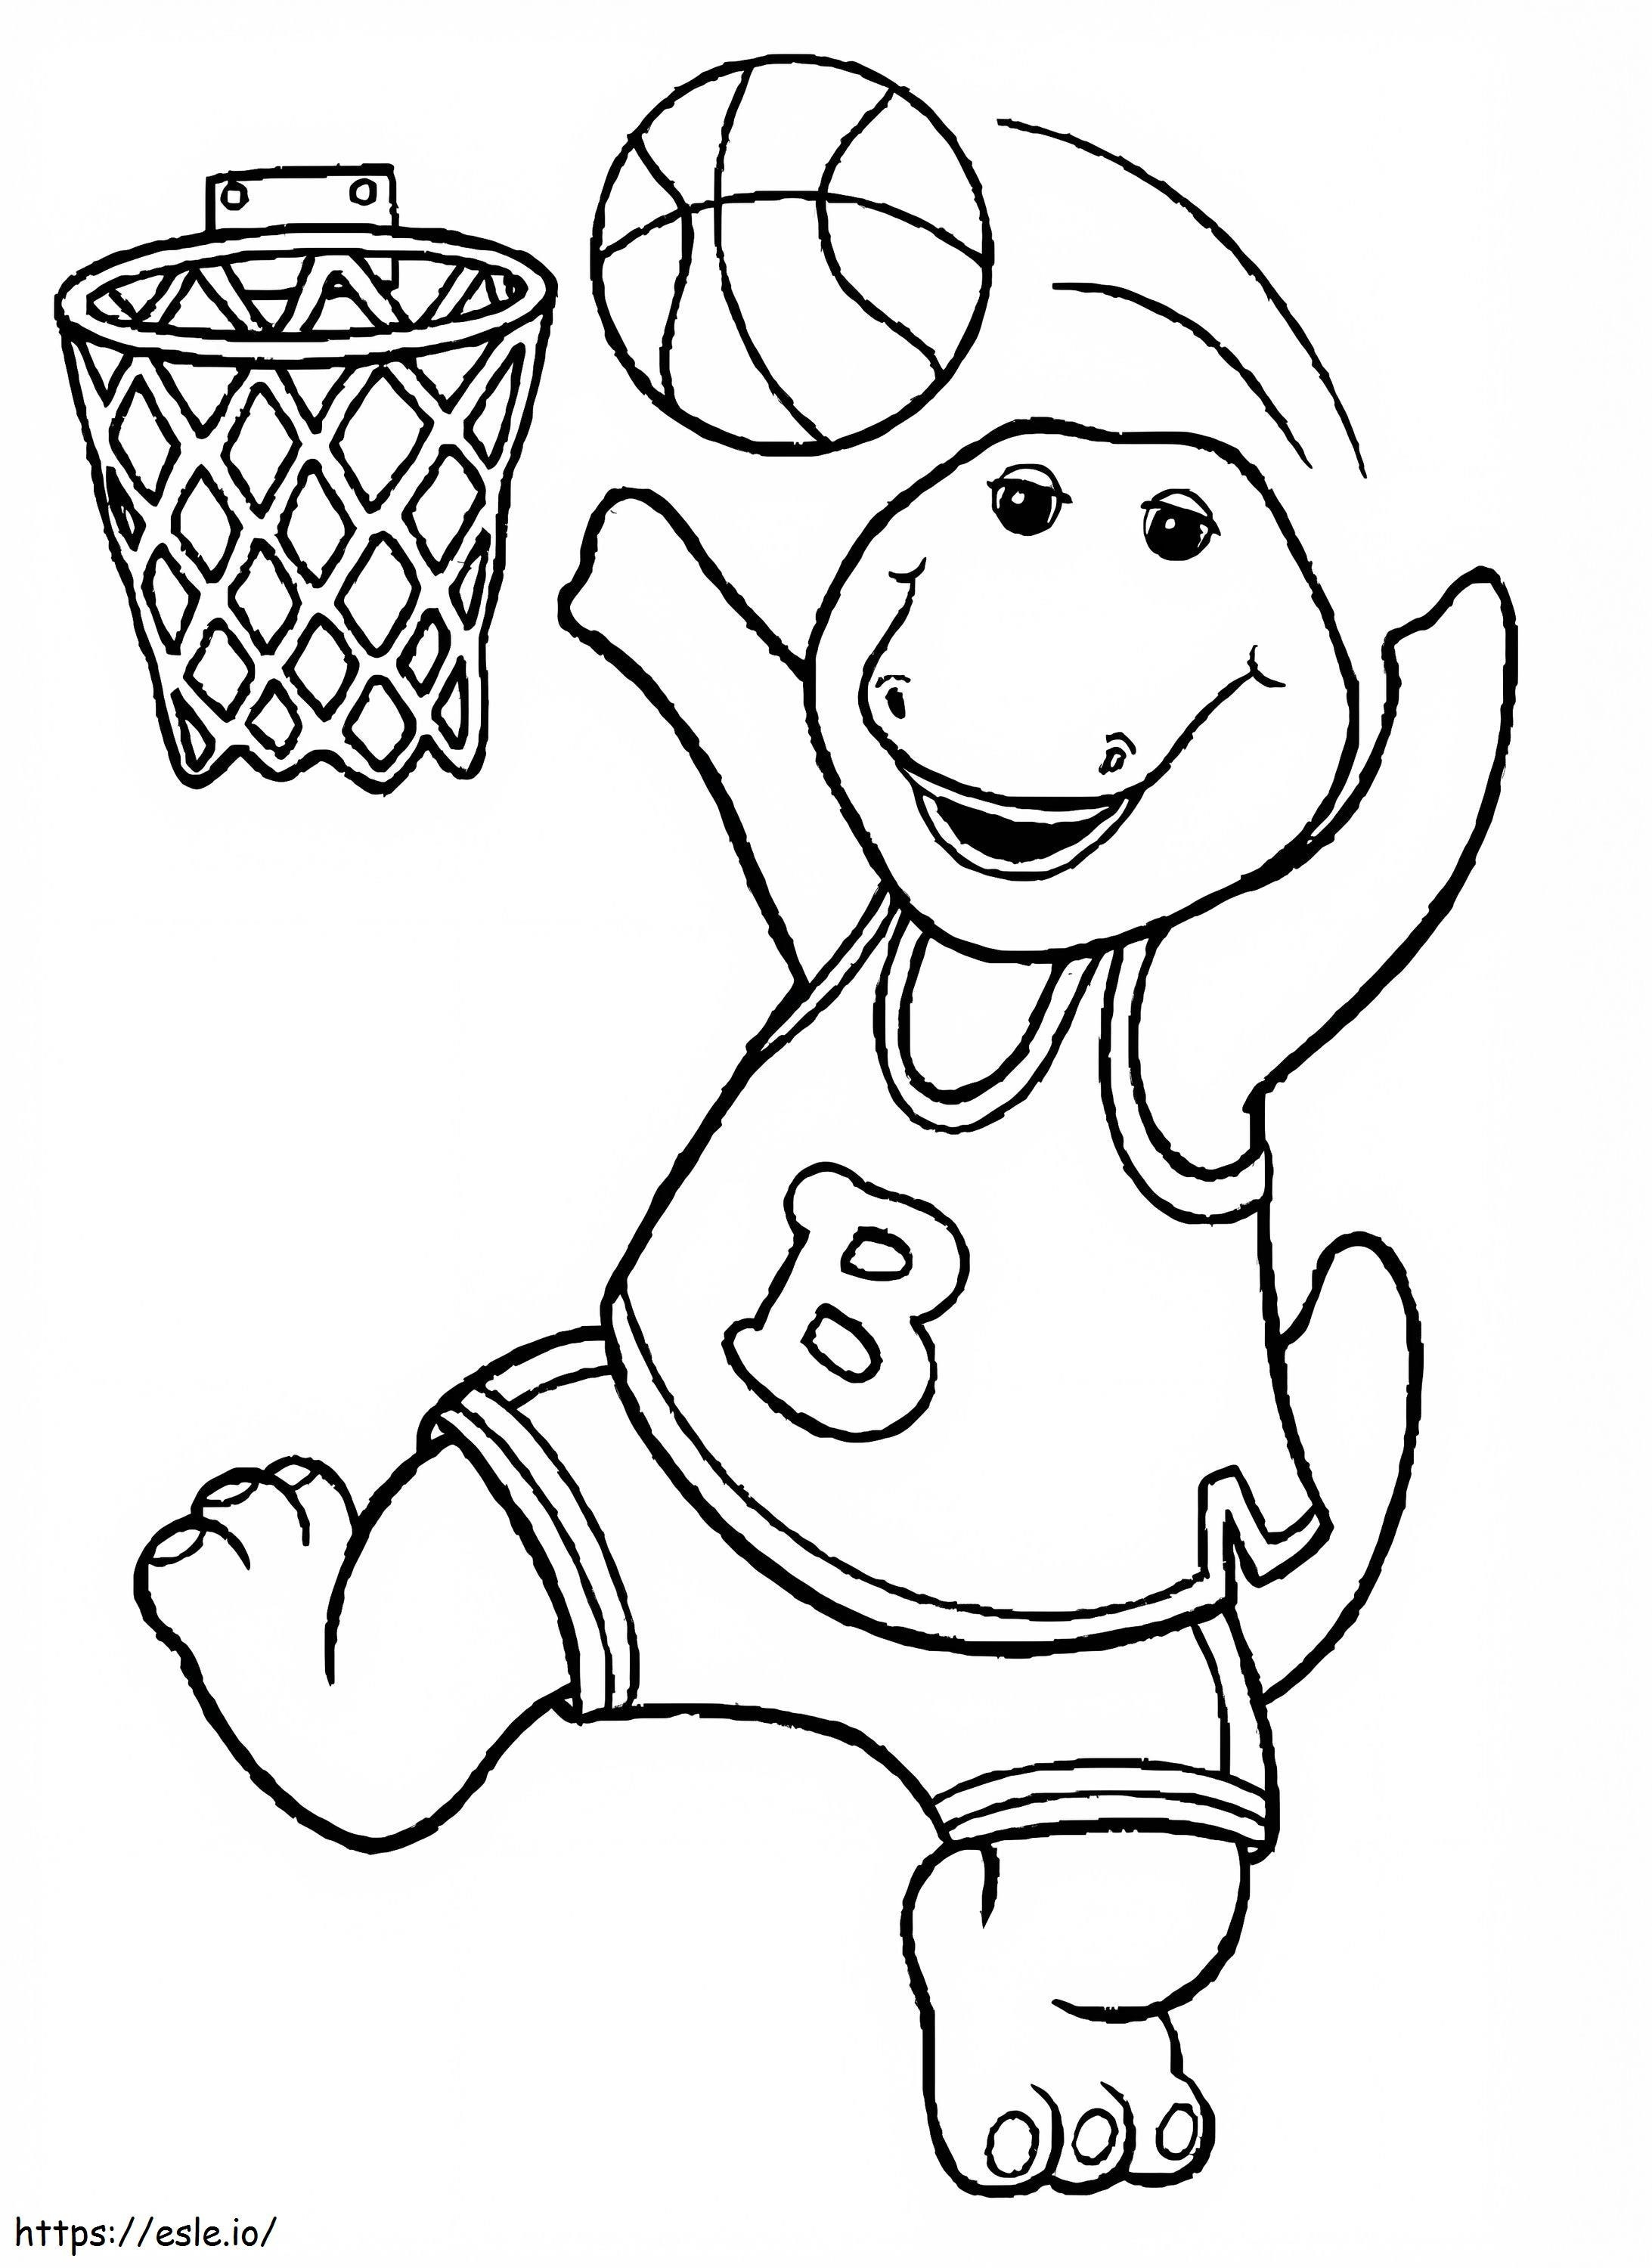 Barney Plays Basketball coloring page